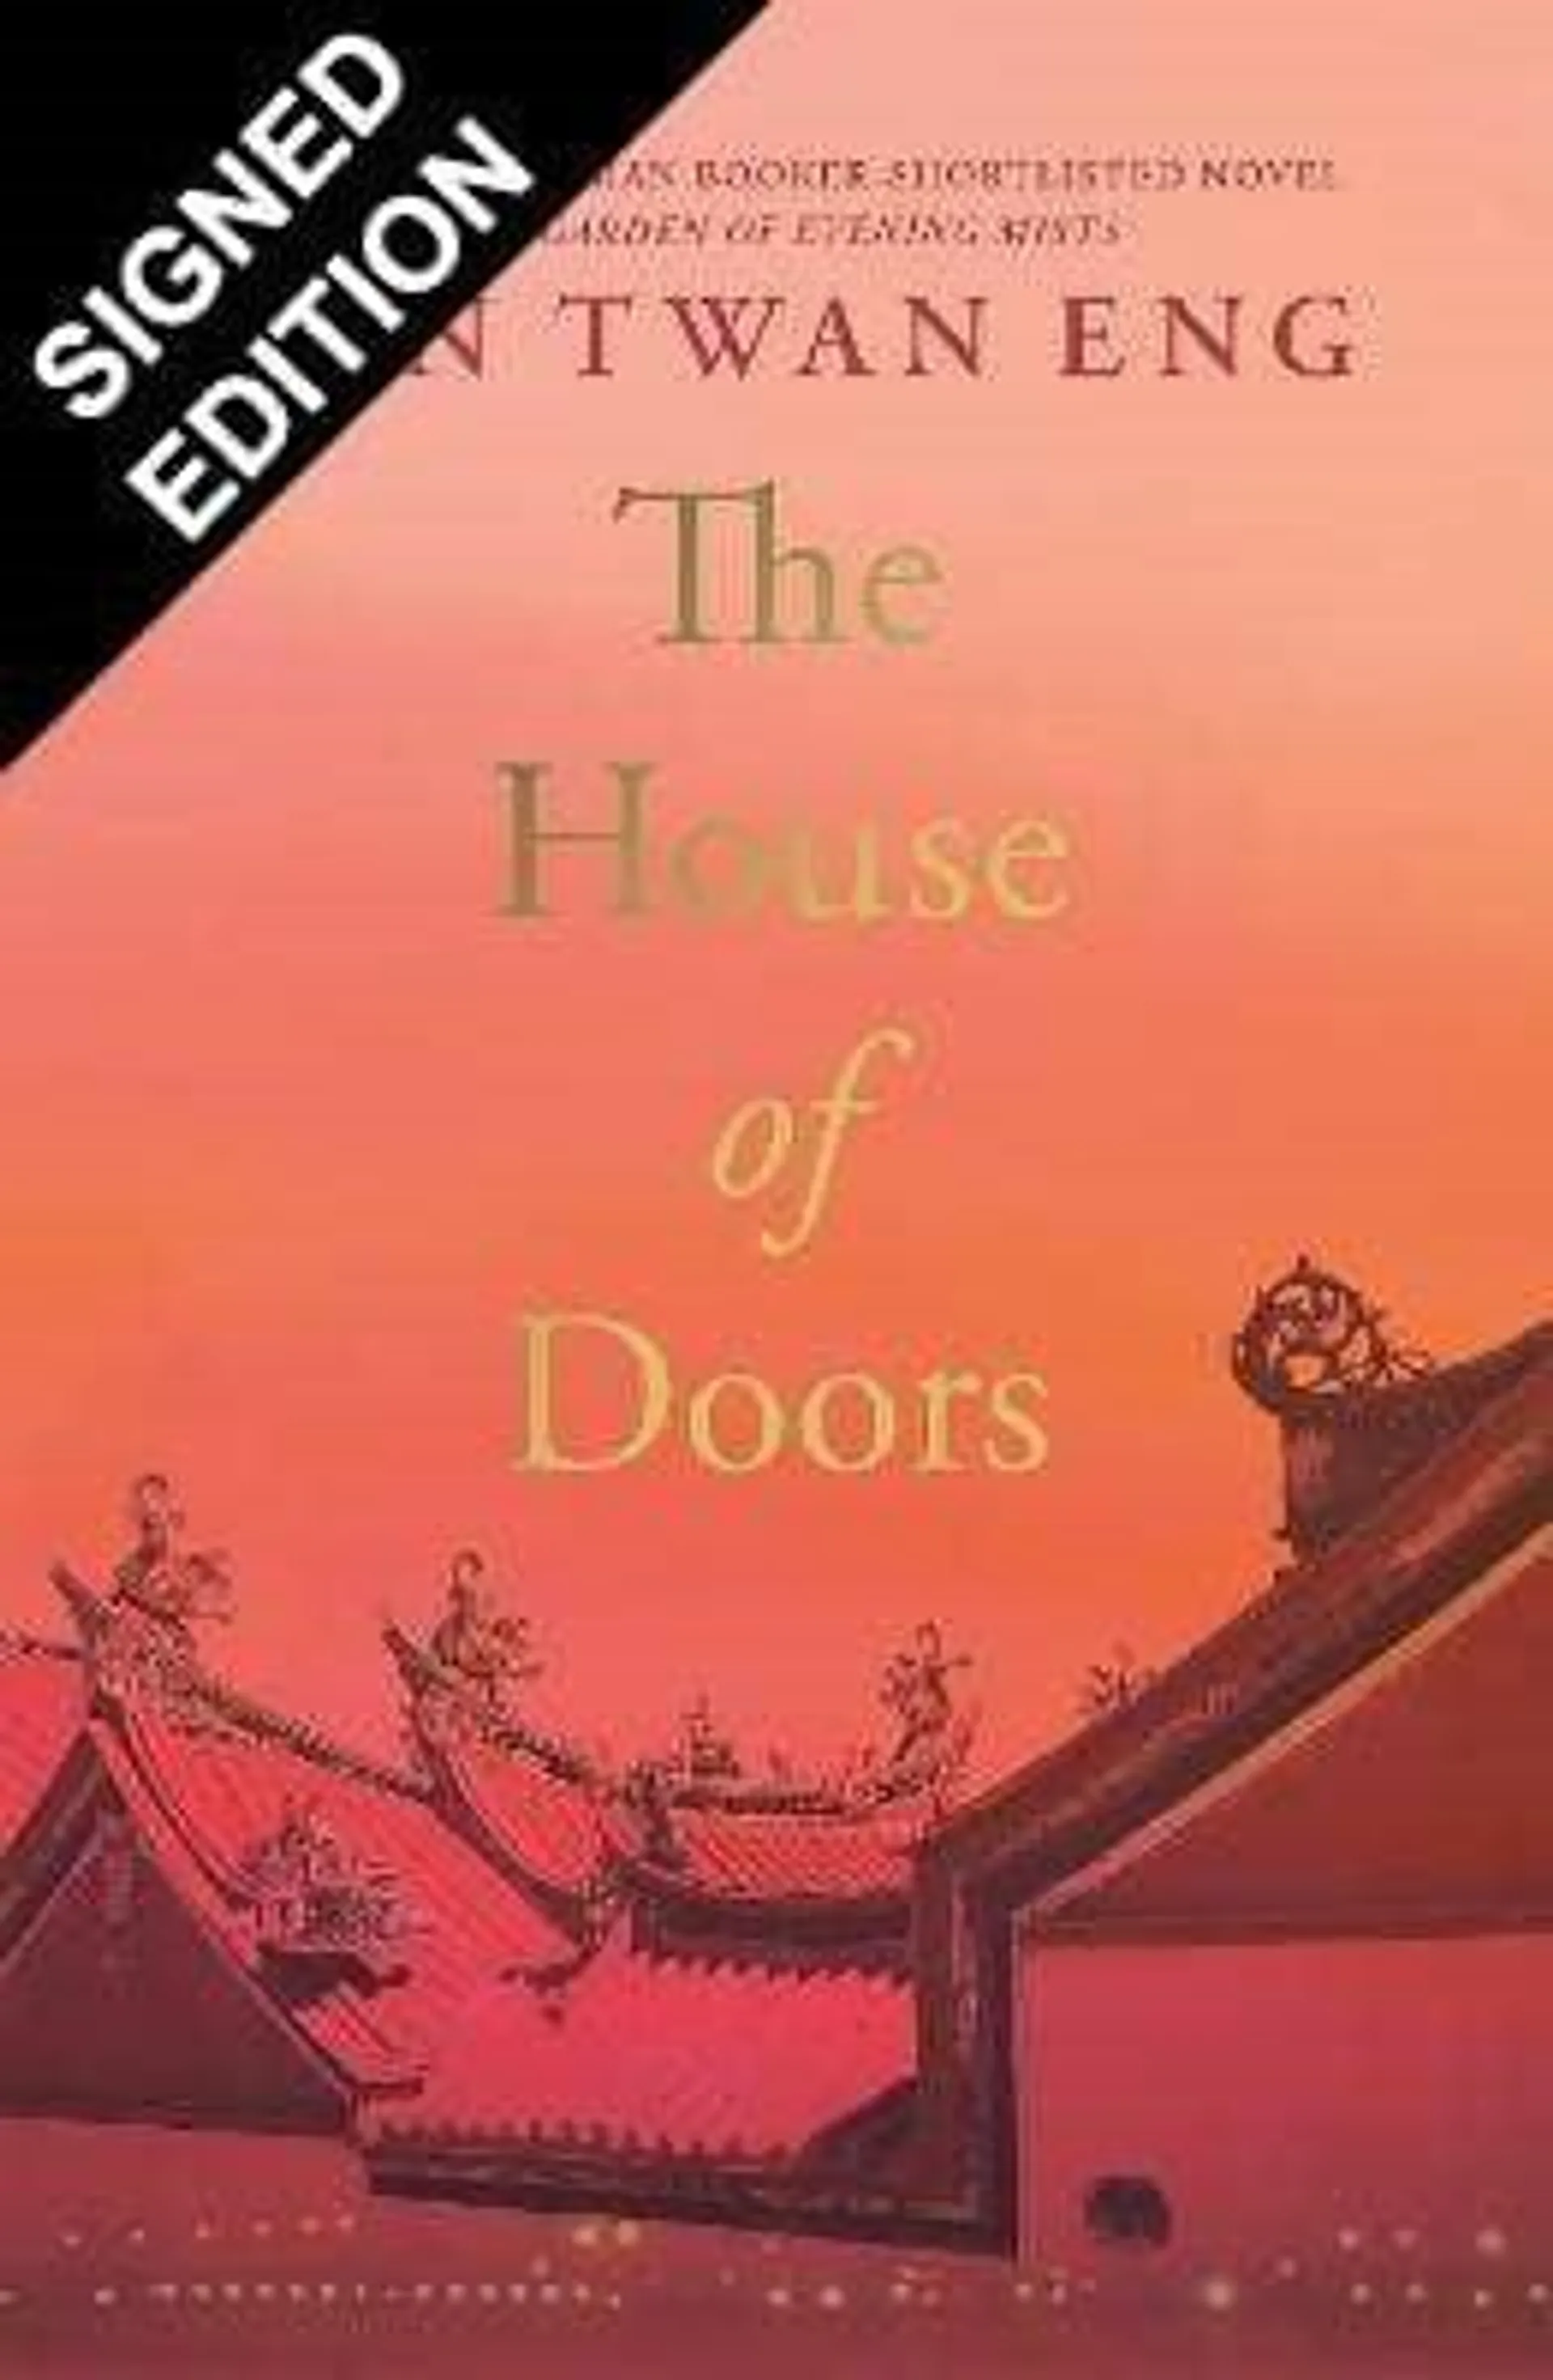 The House of Doors: Signed Edition (Hardback)